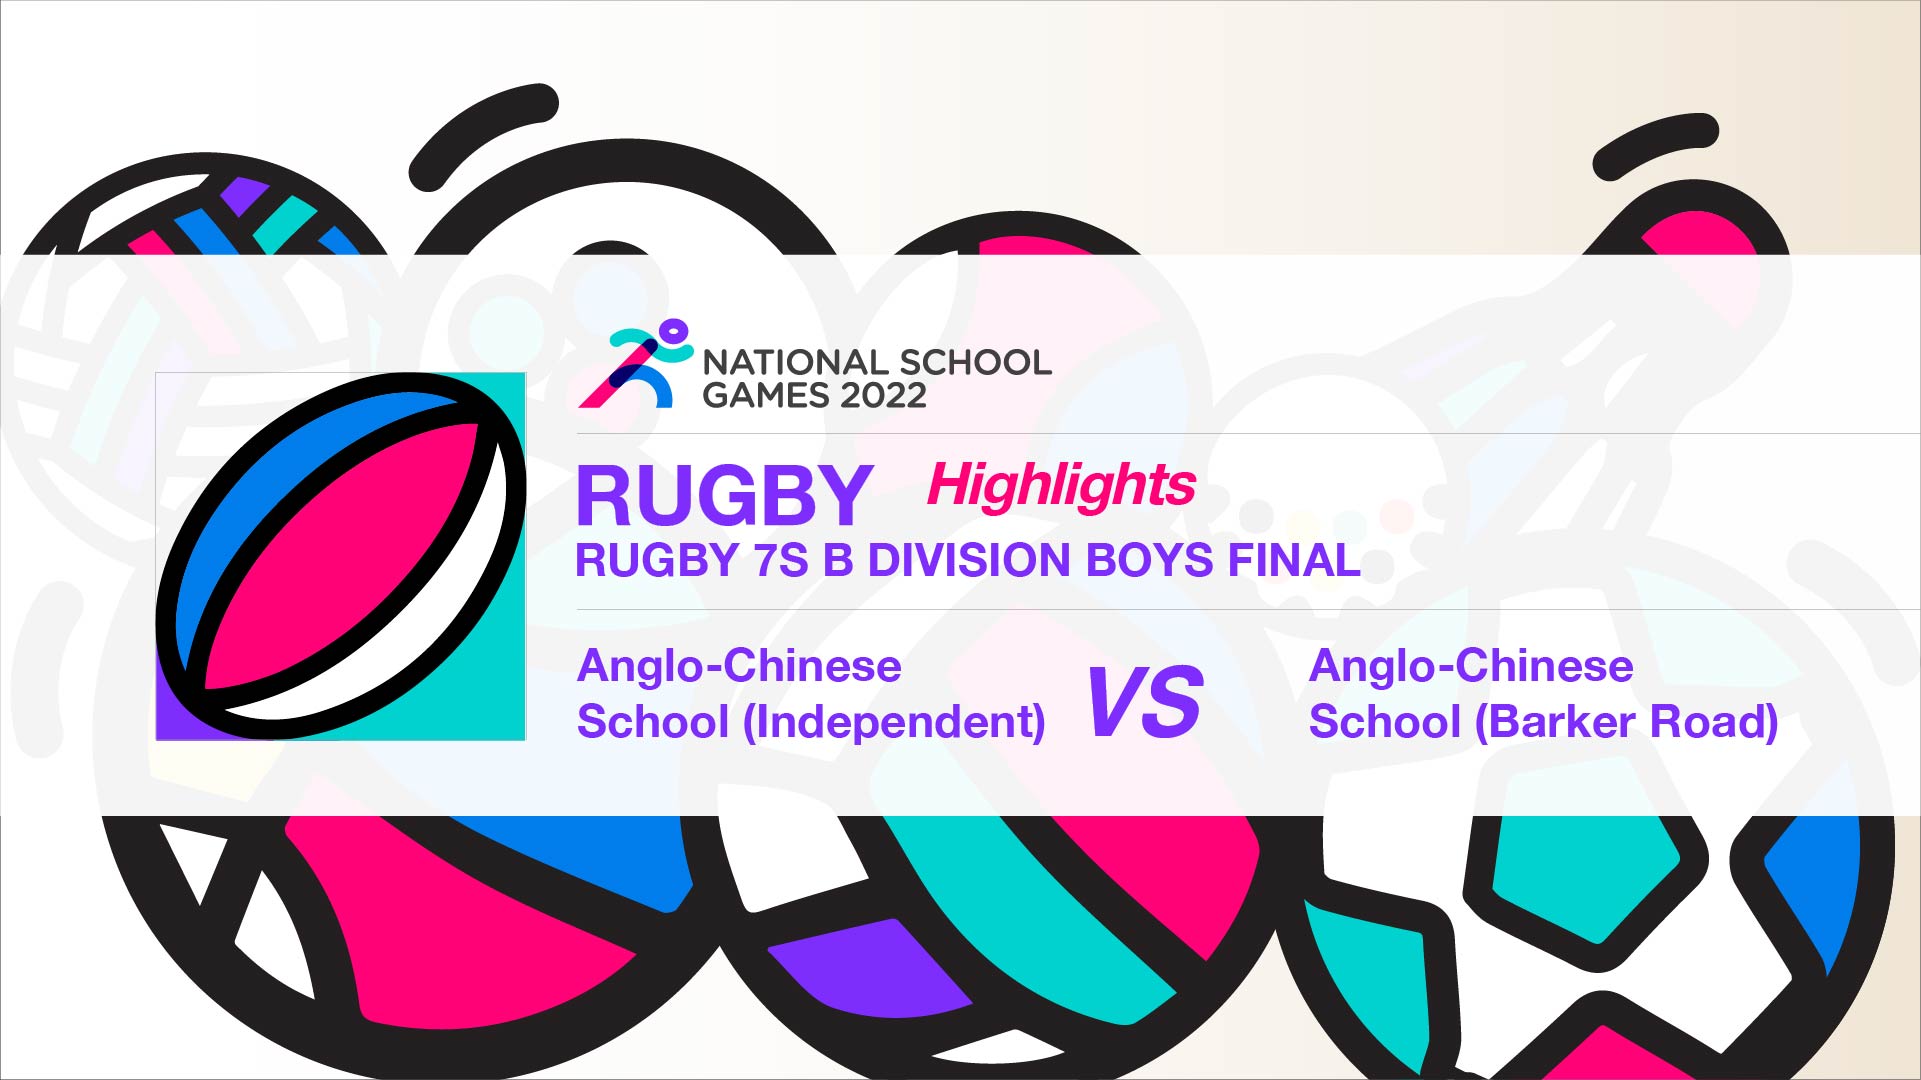 SSSC Rugby 7s B Division Boys Final | Anglo-Chinese School (Independent) vs Anglo-Chinese School (Barker Road) - Highlights